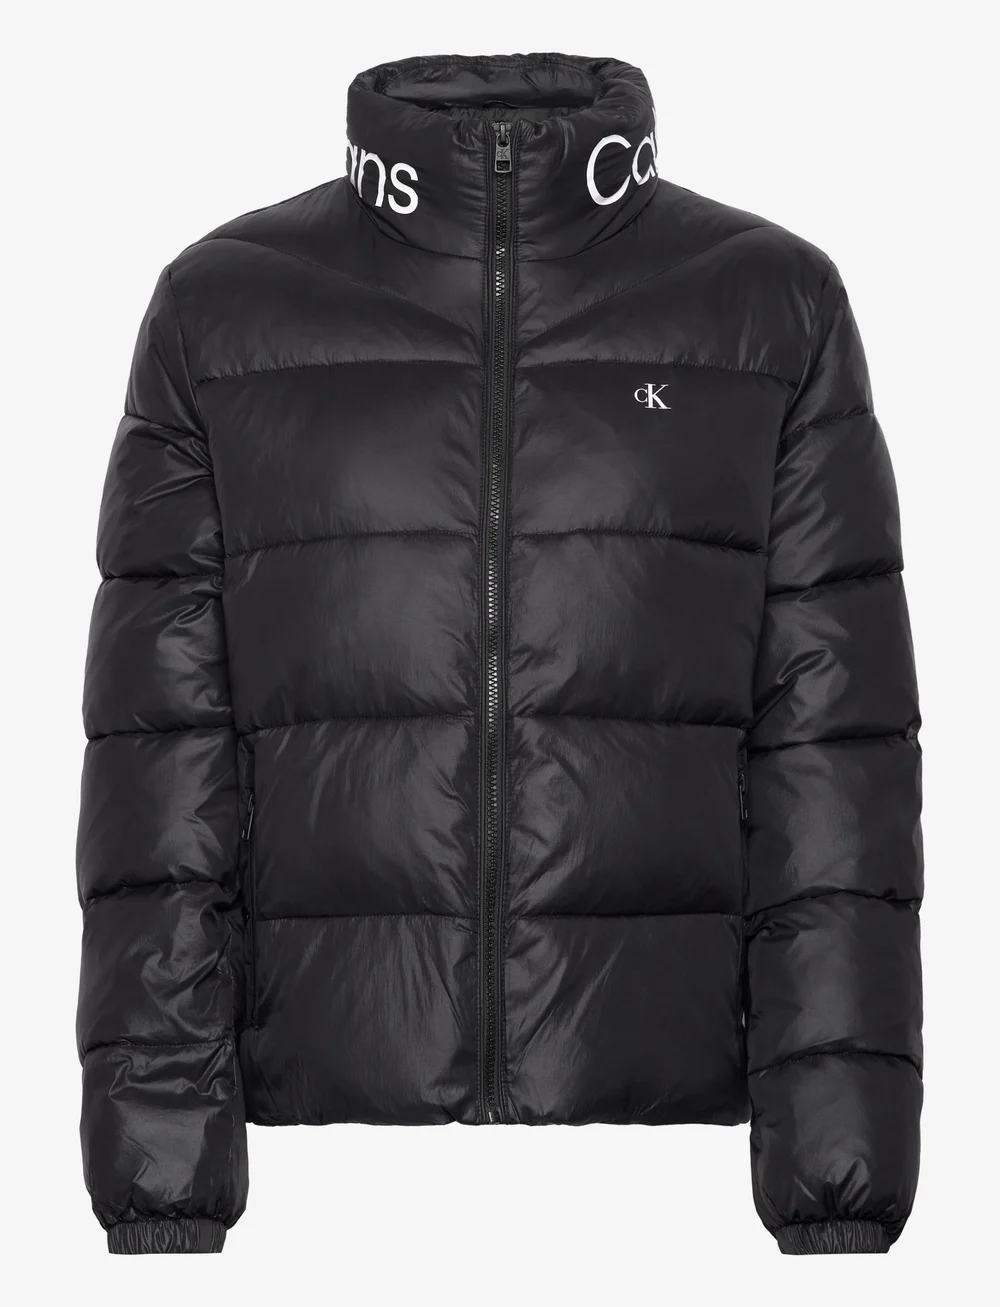 Calvin Klein Jeans Fitted Lw Padded Jacket - 109.95 €. Buy Down- & padded  jackets from Calvin Klein Jeans online at Boozt.com. Fast delivery and easy  returns